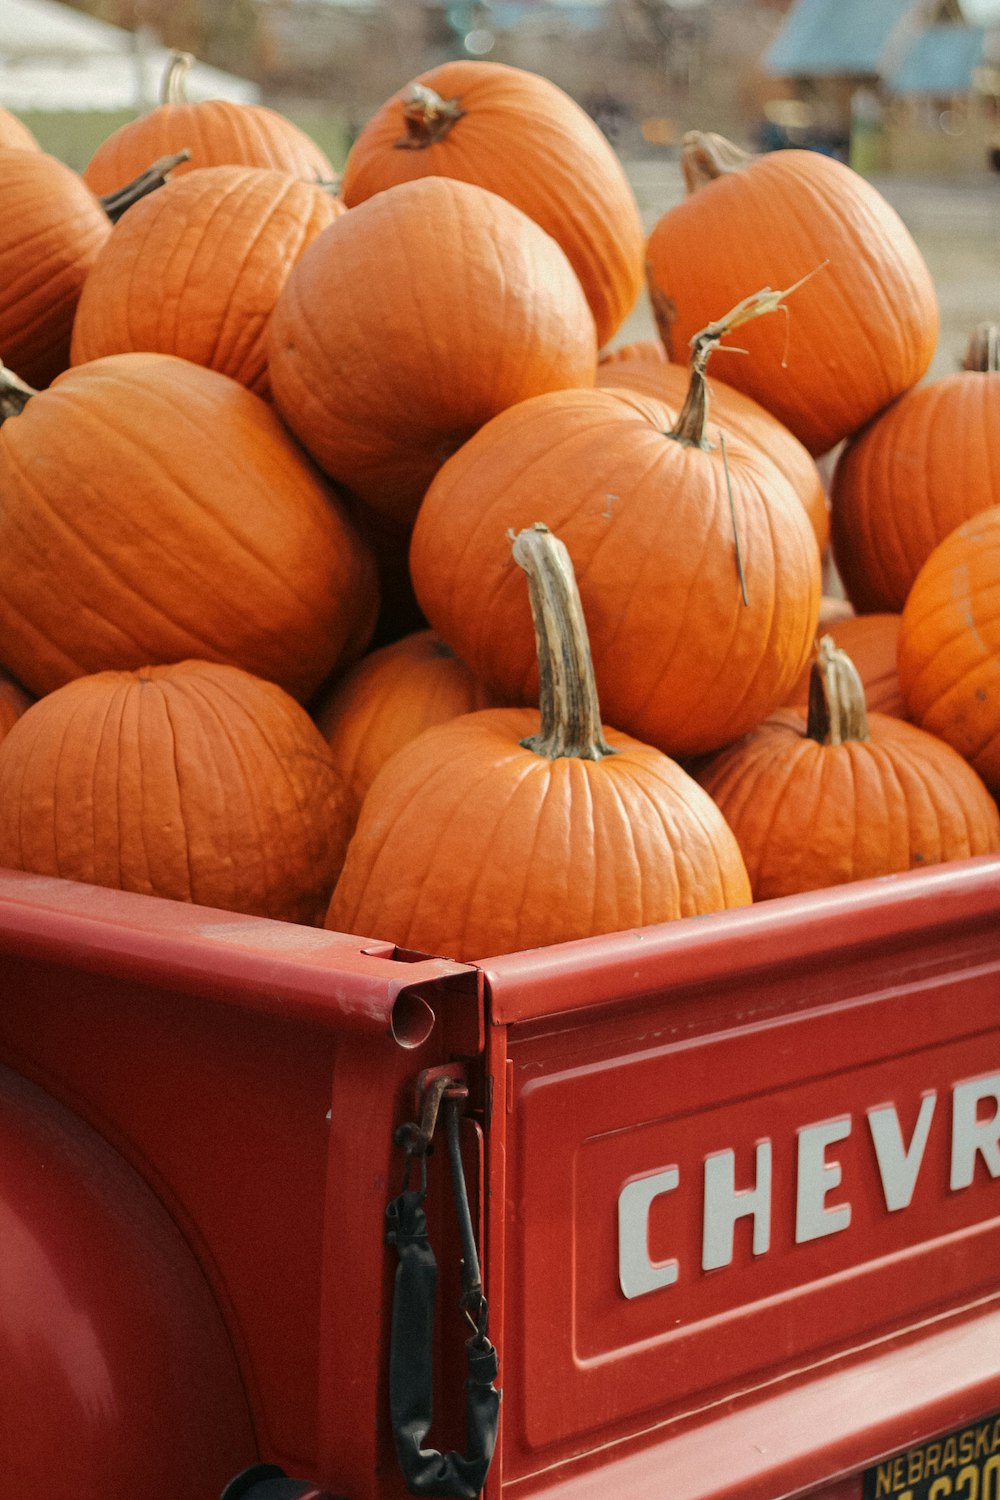 a group of pumpkins in a red crate